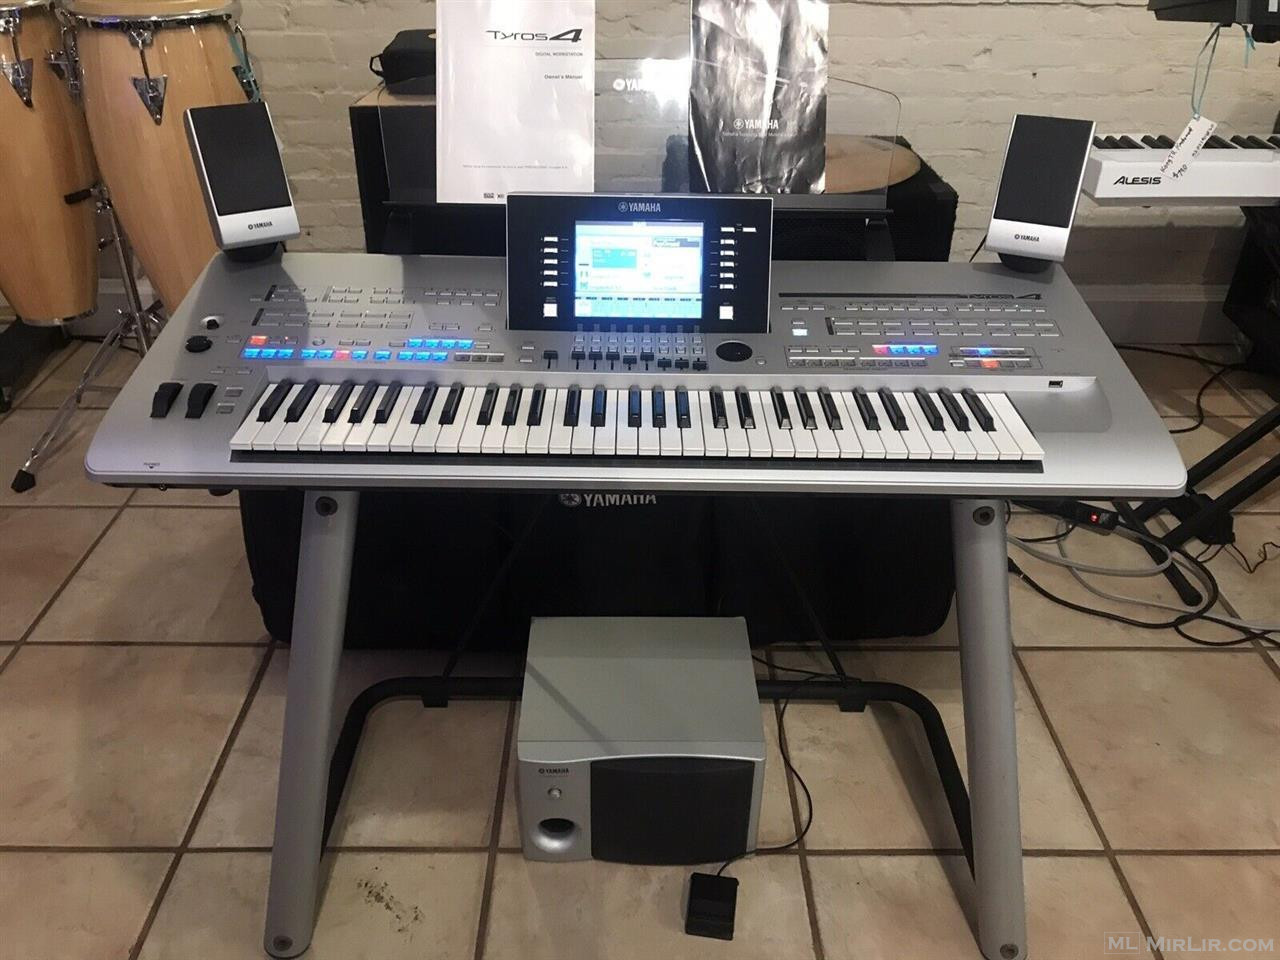 Yamaha Tyros 4 Keyboard with Stand, Sub, Speakers, Music